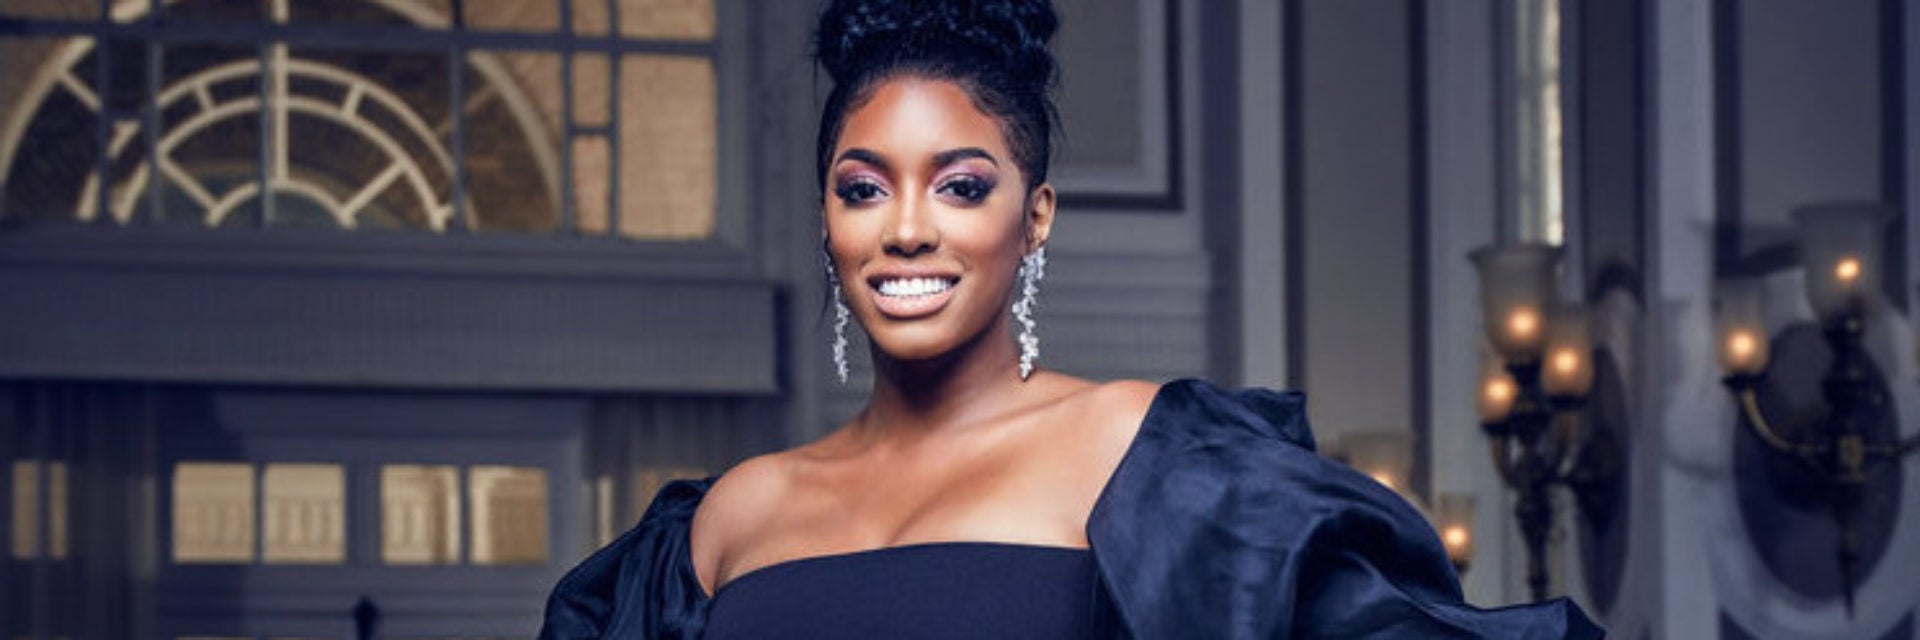 Exclusive: Porsha Williams Is Returning To 'Real Housewives Of Atlanta' Prepared To Tell Her Truth